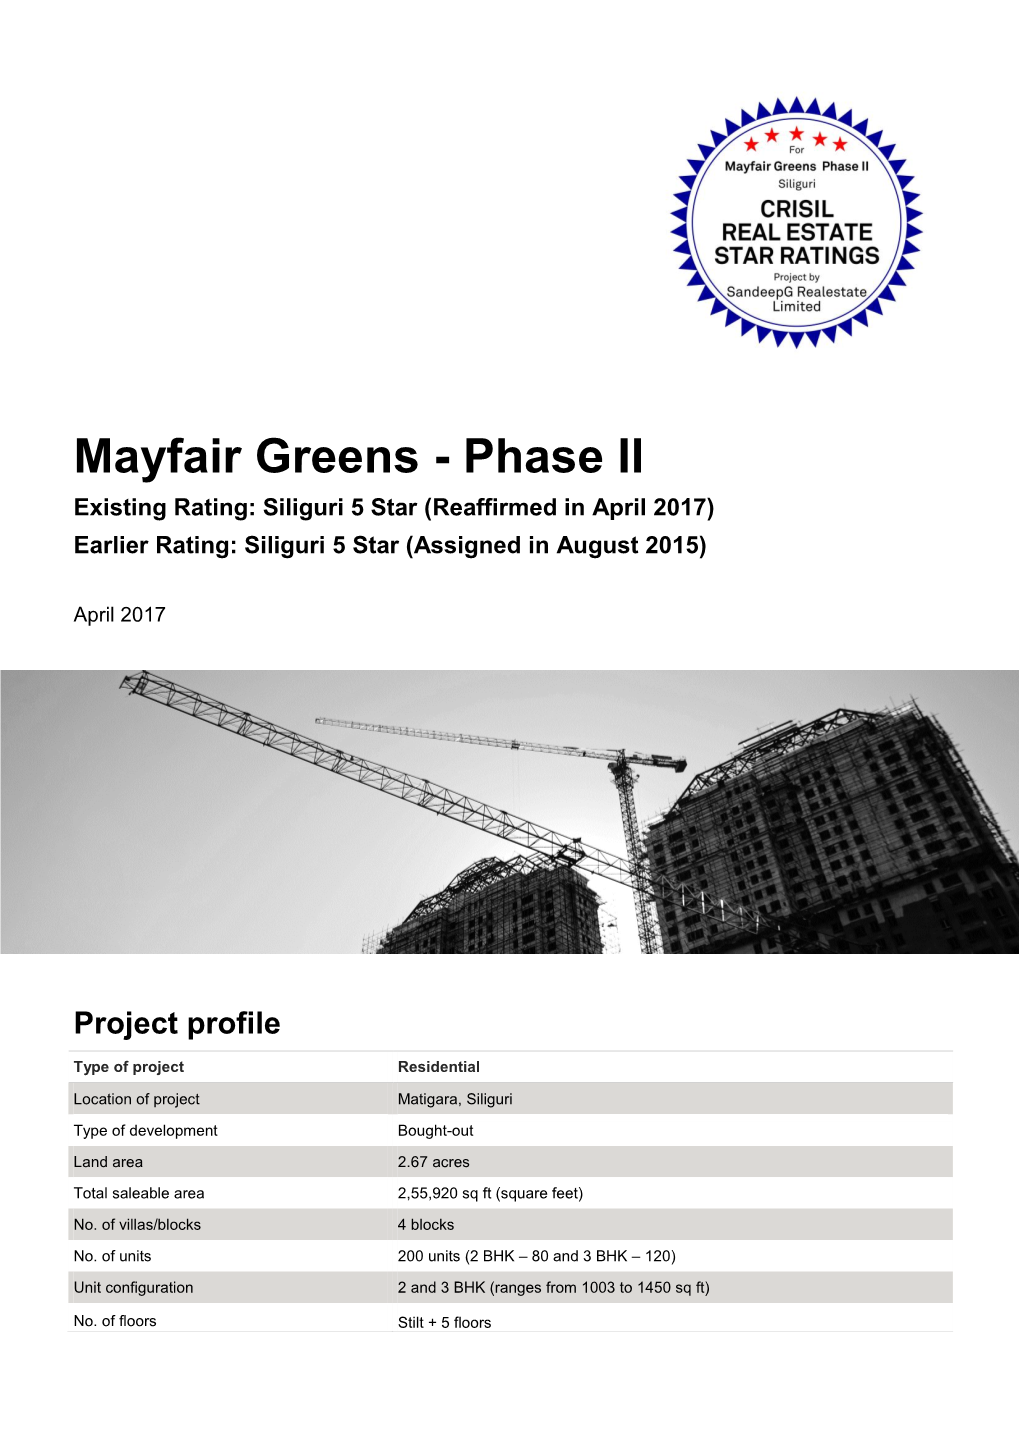 Mayfair Greens - Phase II Existing Rating: Siliguri 5 Star (Reaffirmed in April 2017) Earlier Rating: Siliguri 5 Star (Assigned in August 2015)